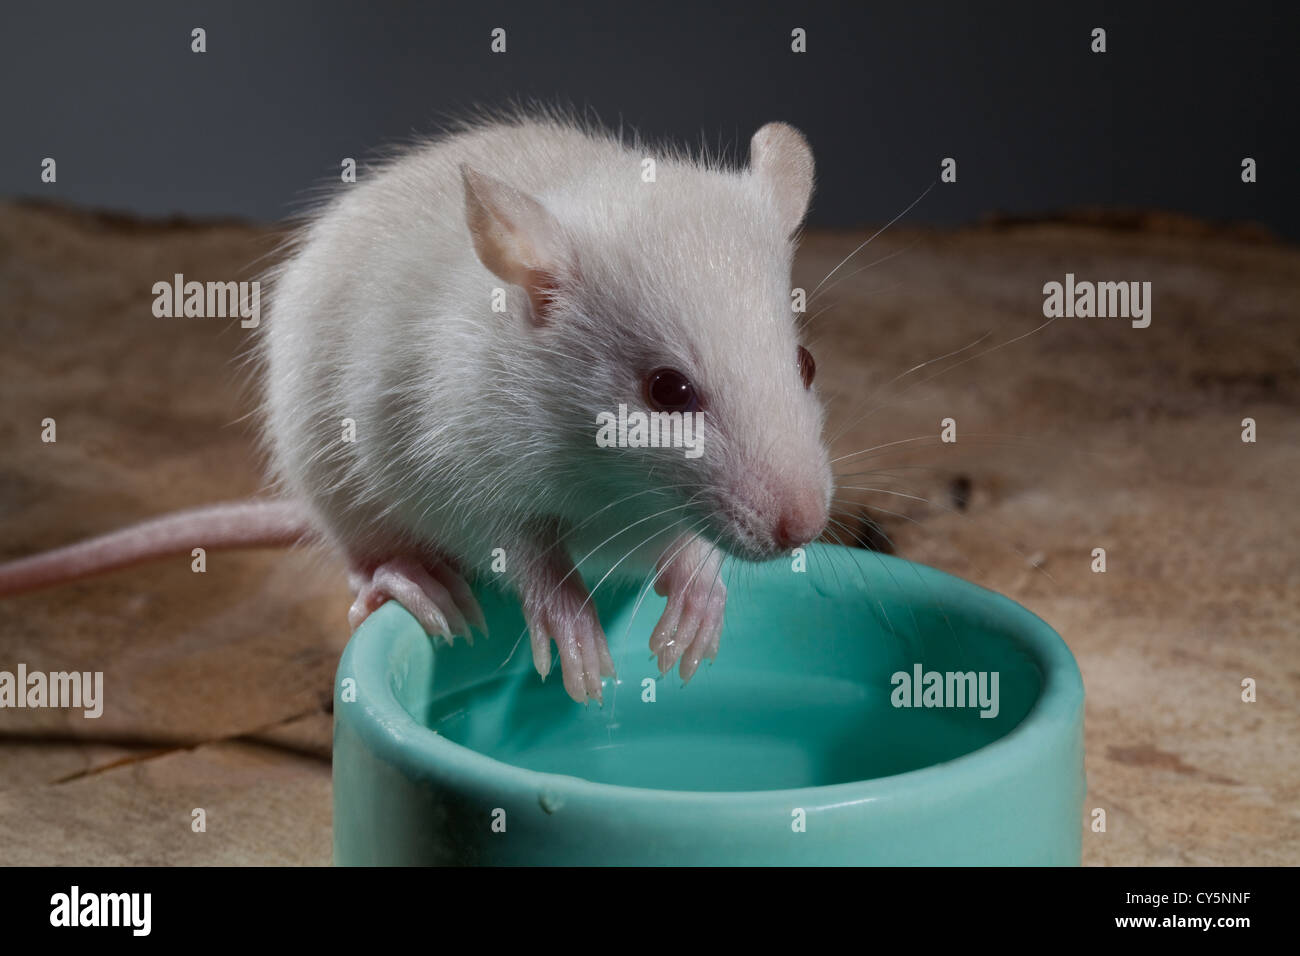 Young White or Albino Rat (Rattus norvegicus). Pet, sitting on the rim of a water bowl, using tail as a counterbalance. Stock Photo